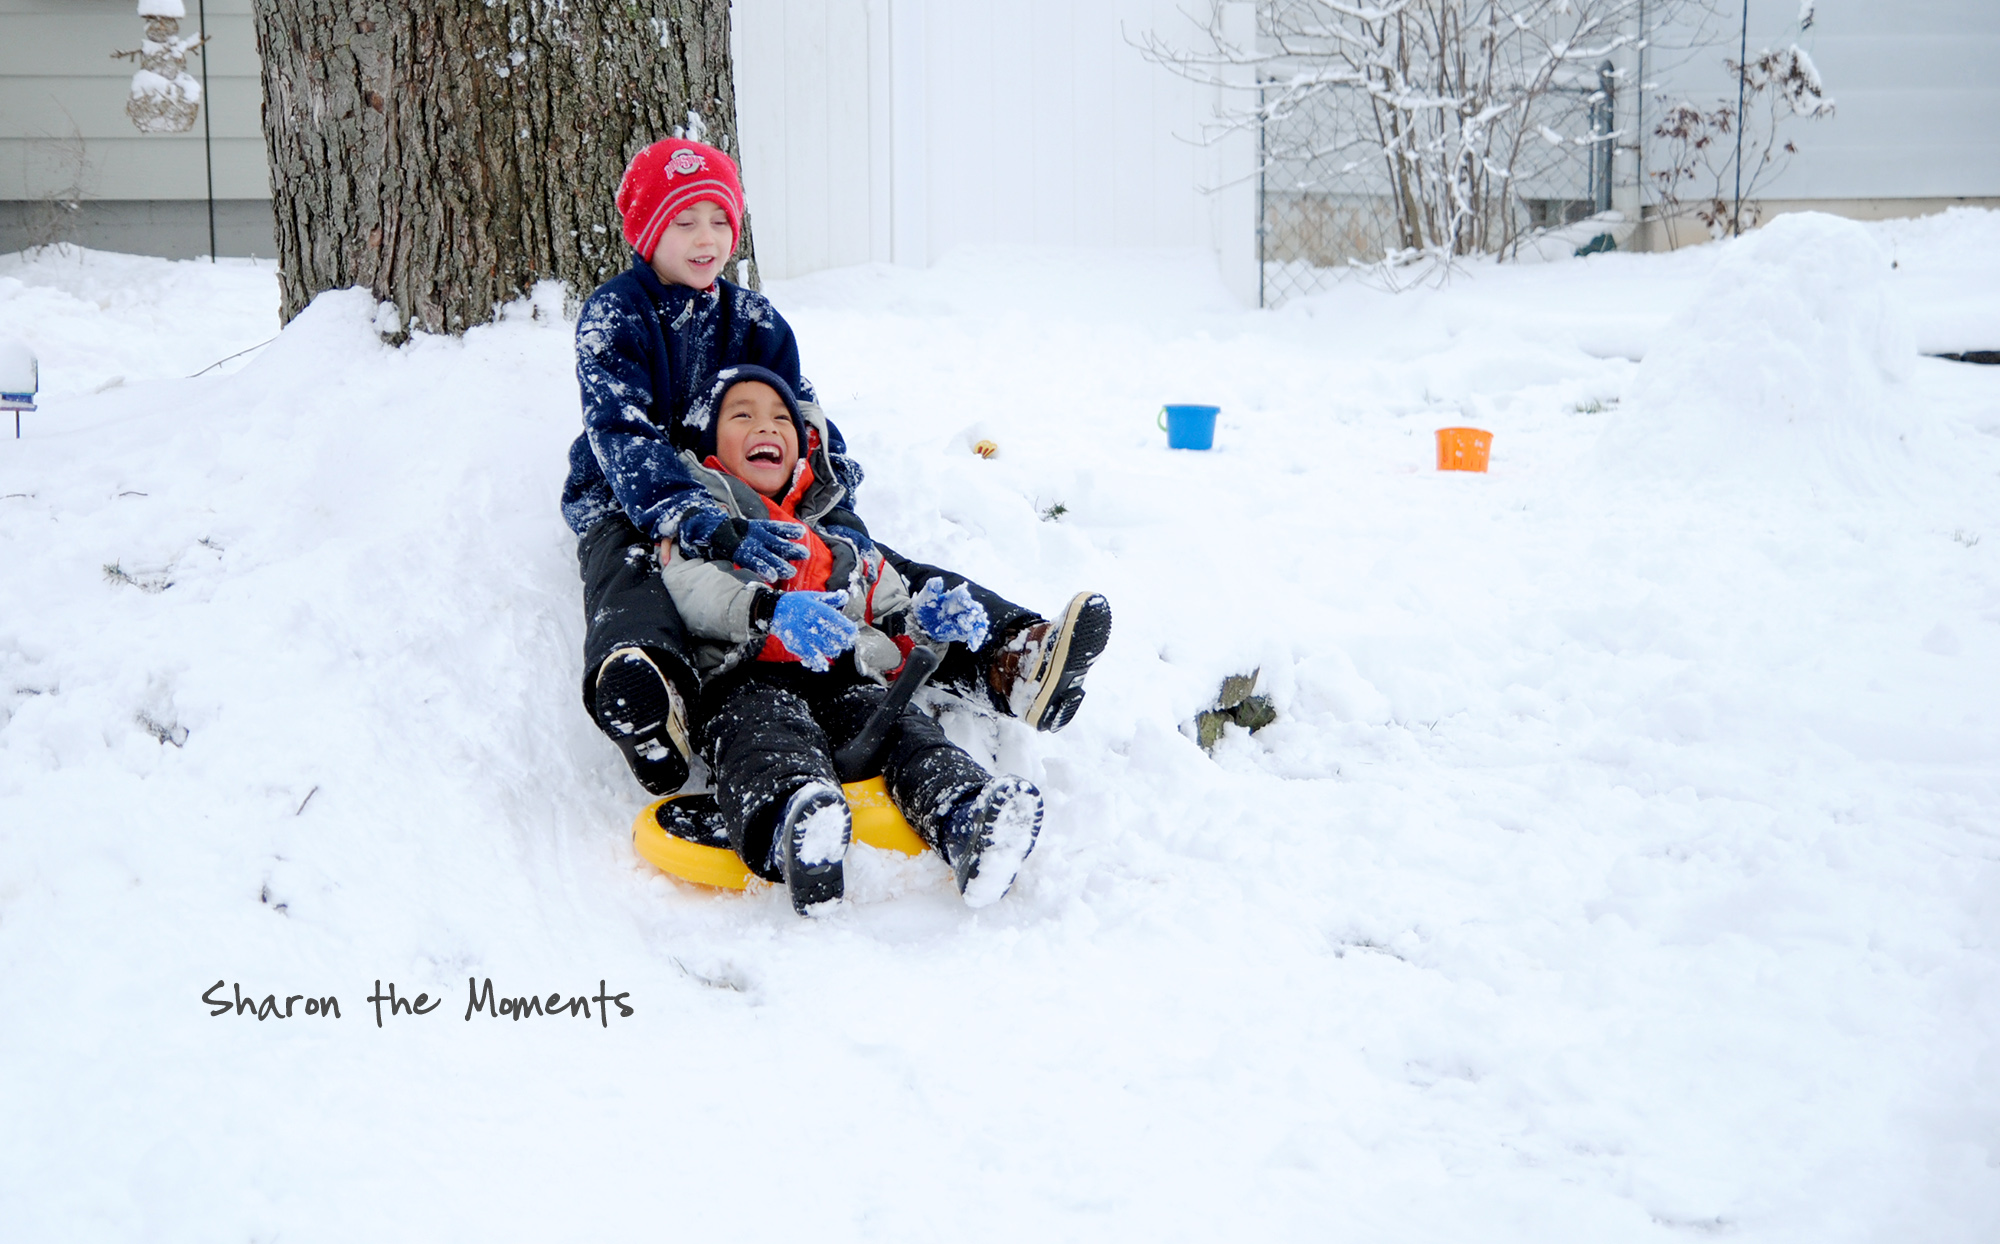 Snow Day for Making Mini Sledding Hills and Snow Angels|Sharon the Moments blog